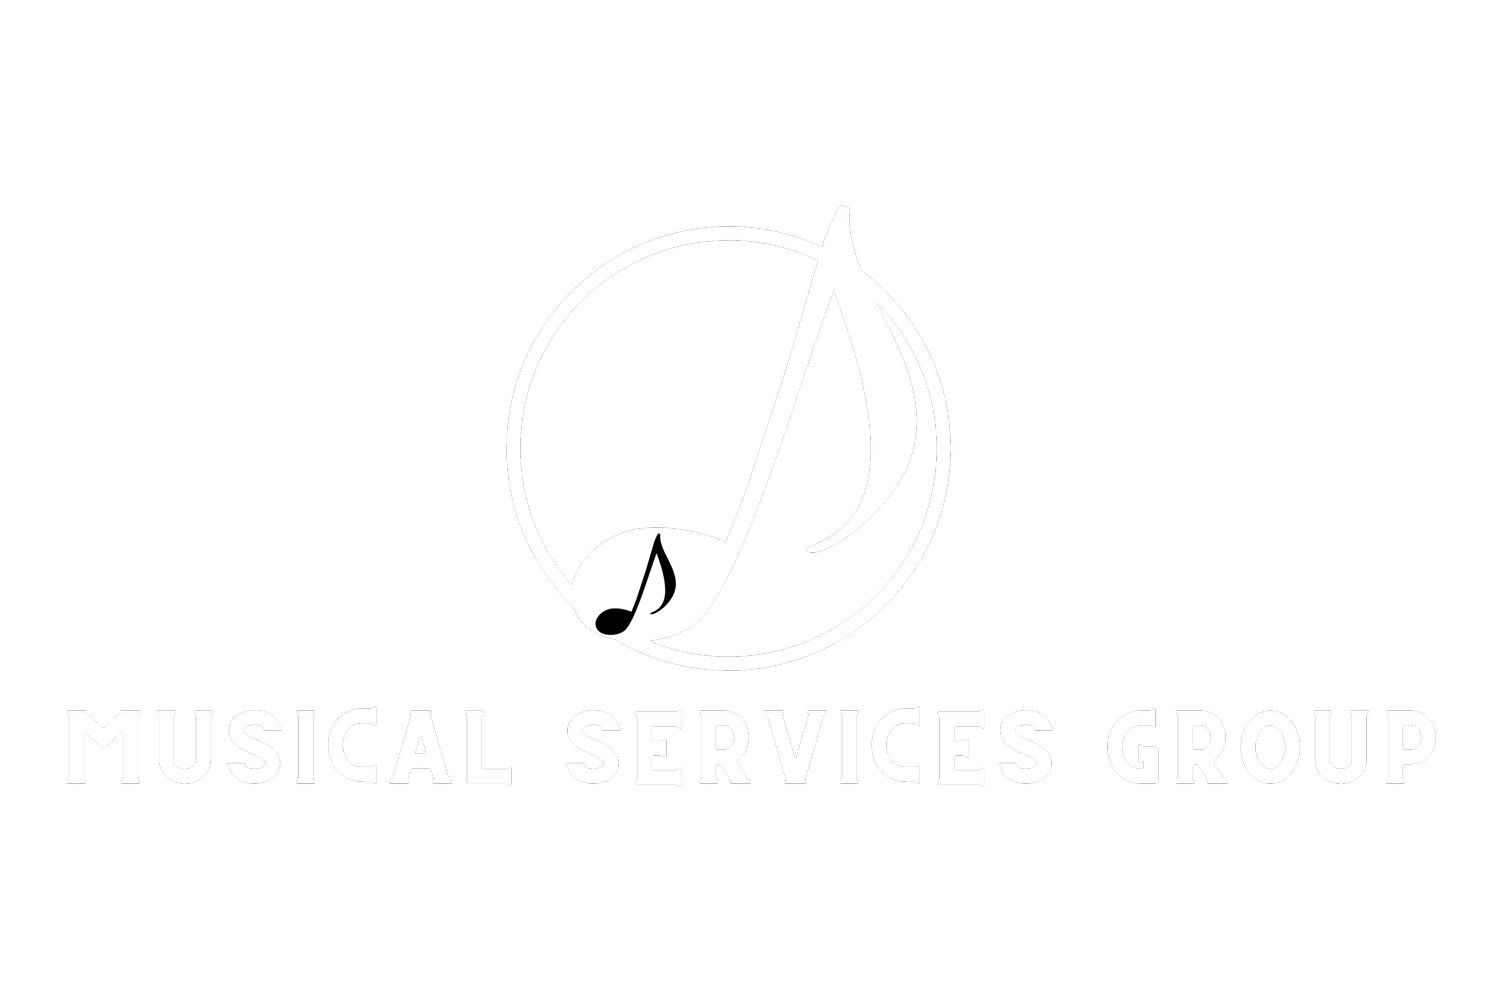 Musical Services Group